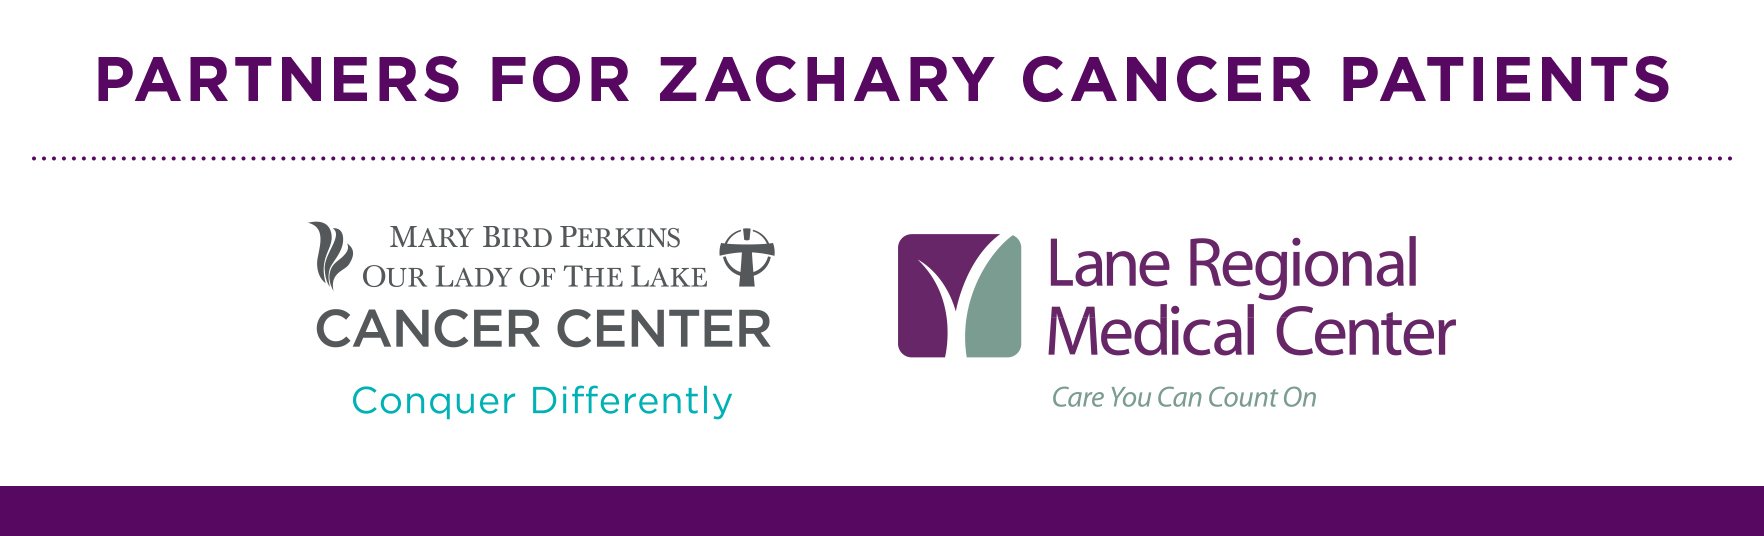 Partners for Zachary Cancer Patients